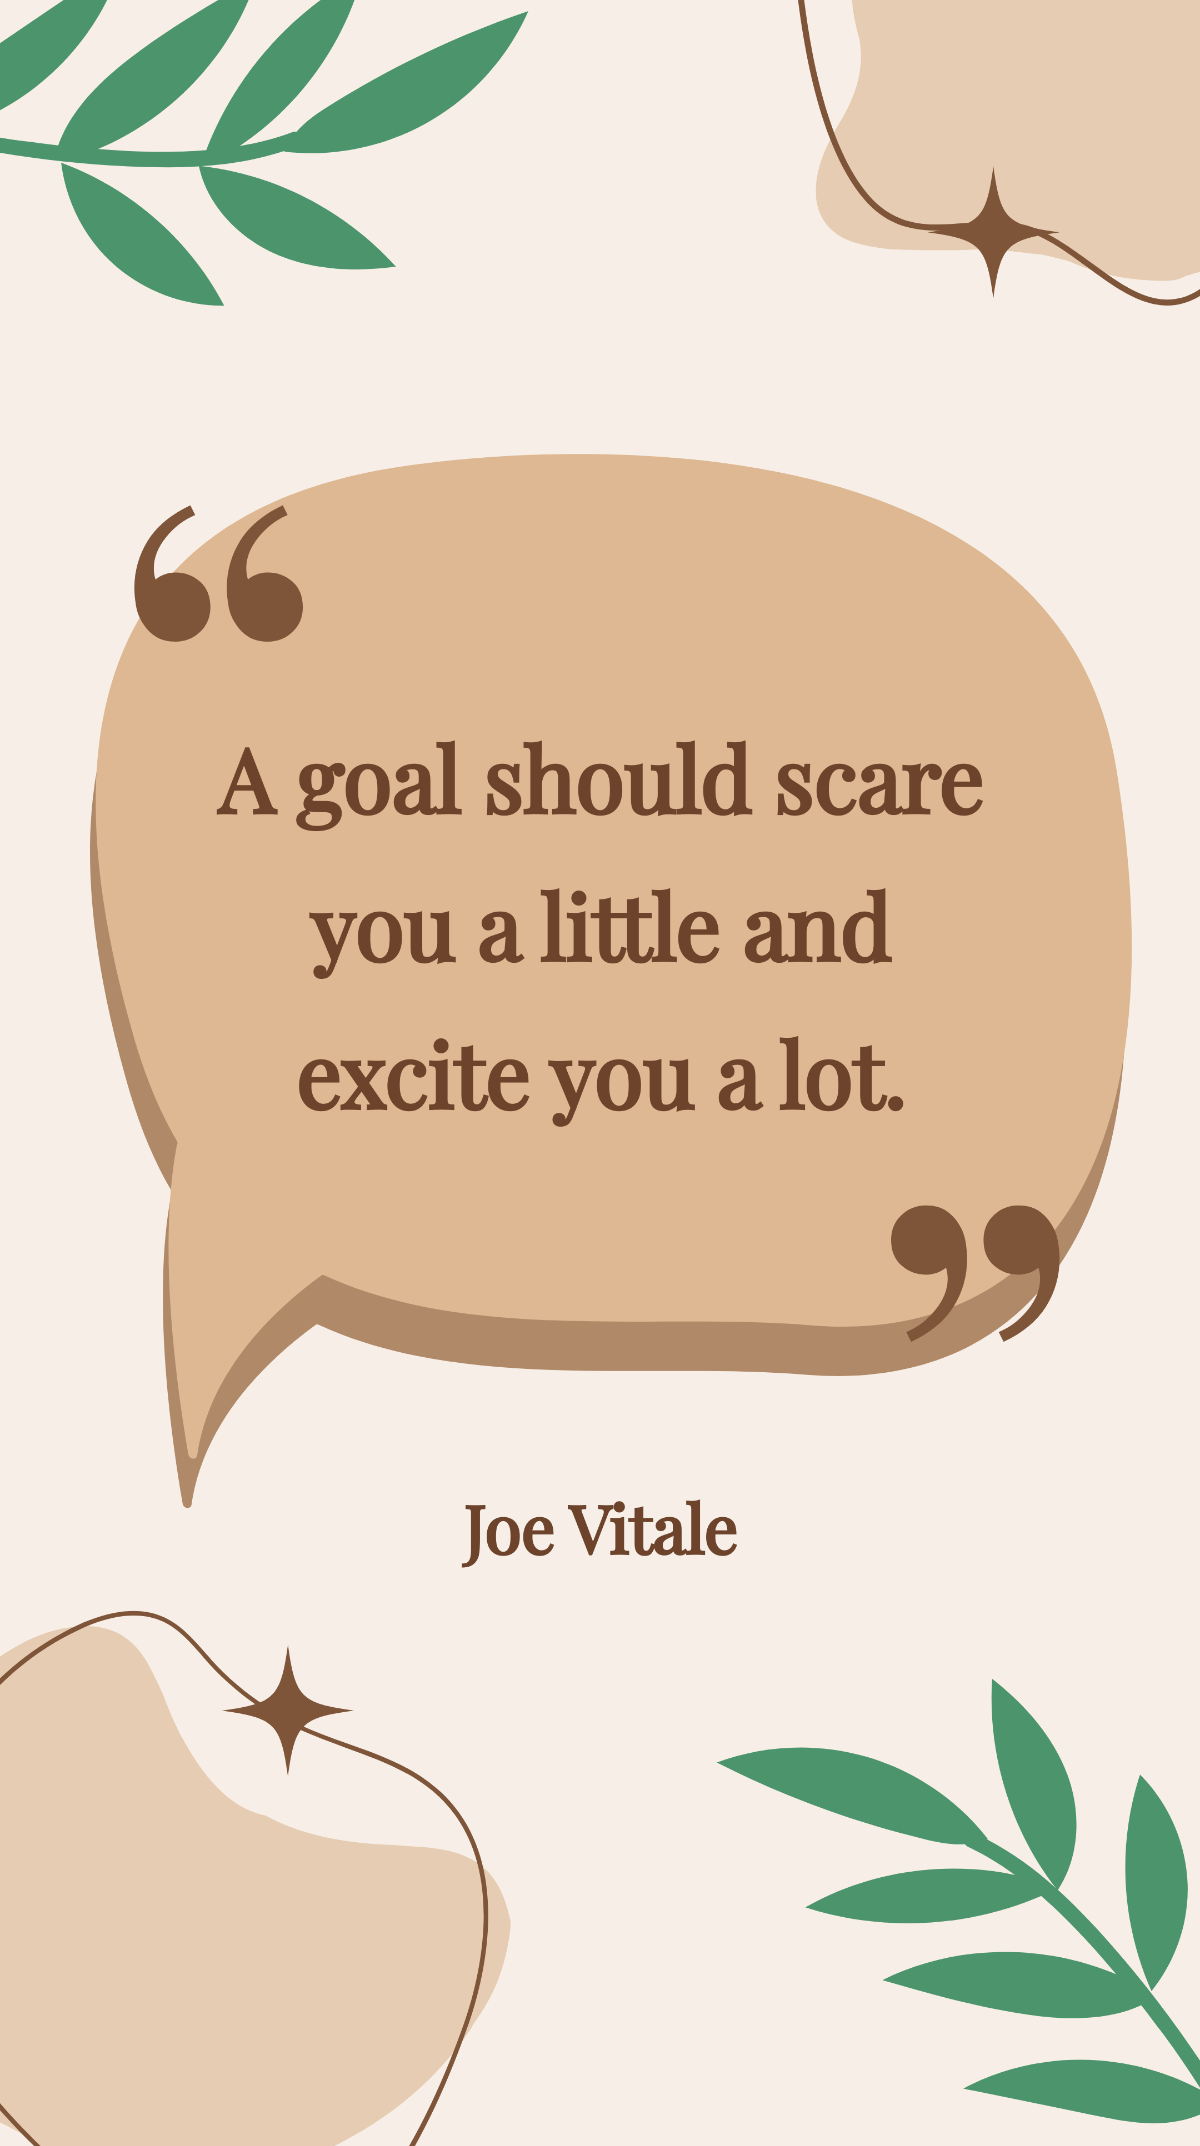 Joe Vitale - “A goal should scare you a little and excite you a lot.